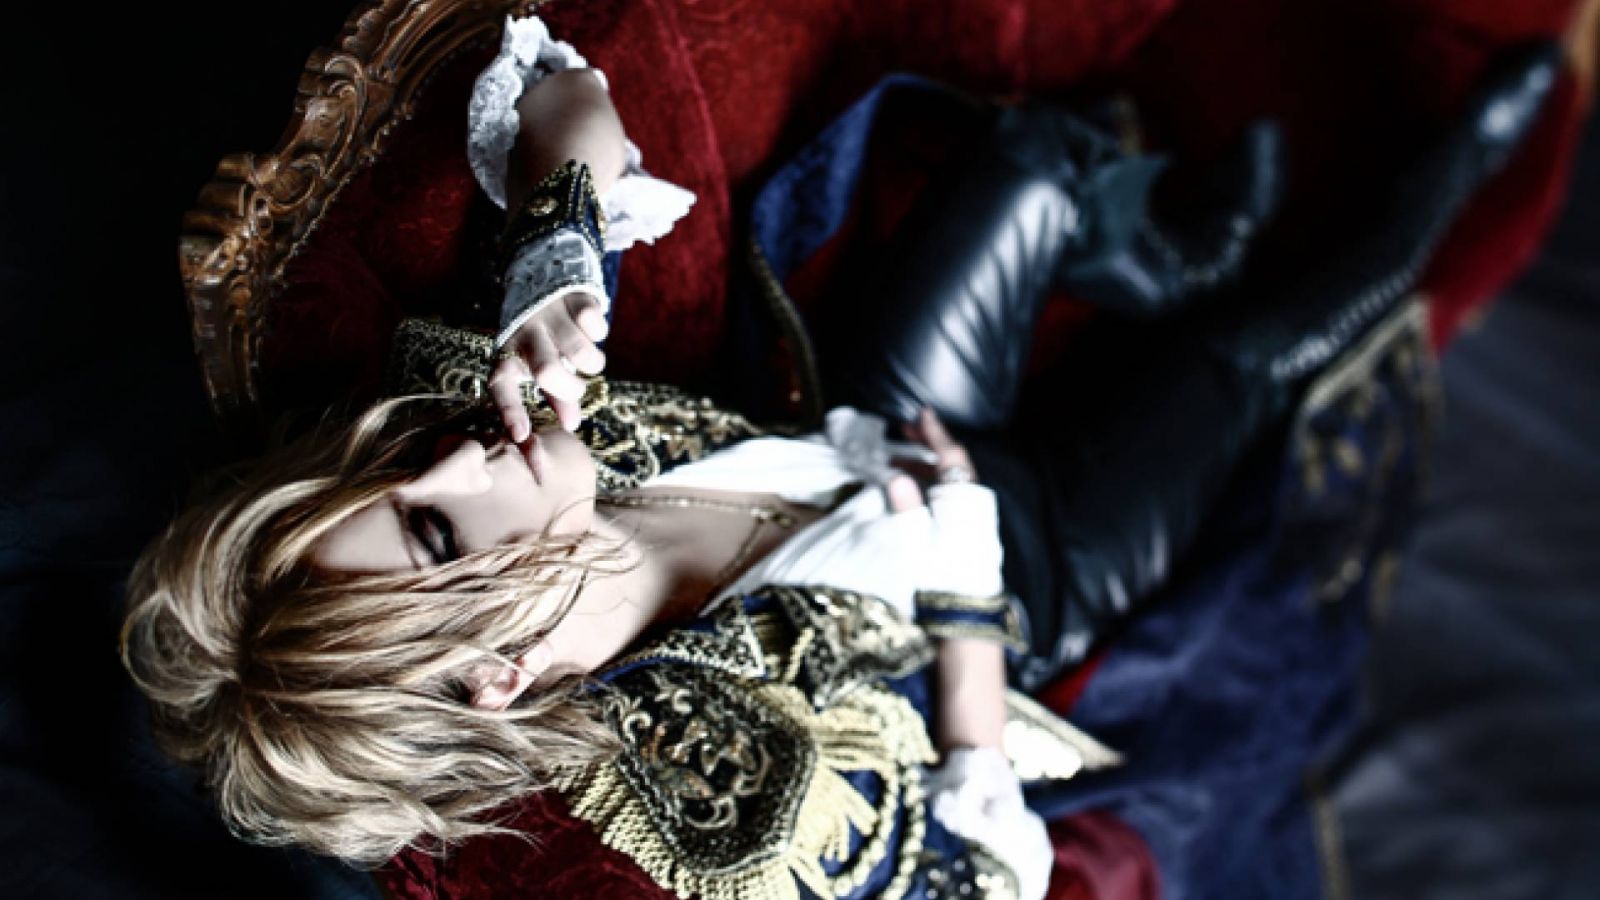 KAMIJO at The Underworld, London © CHATEAU AGENCY CO., Ltd. All rights reserved.